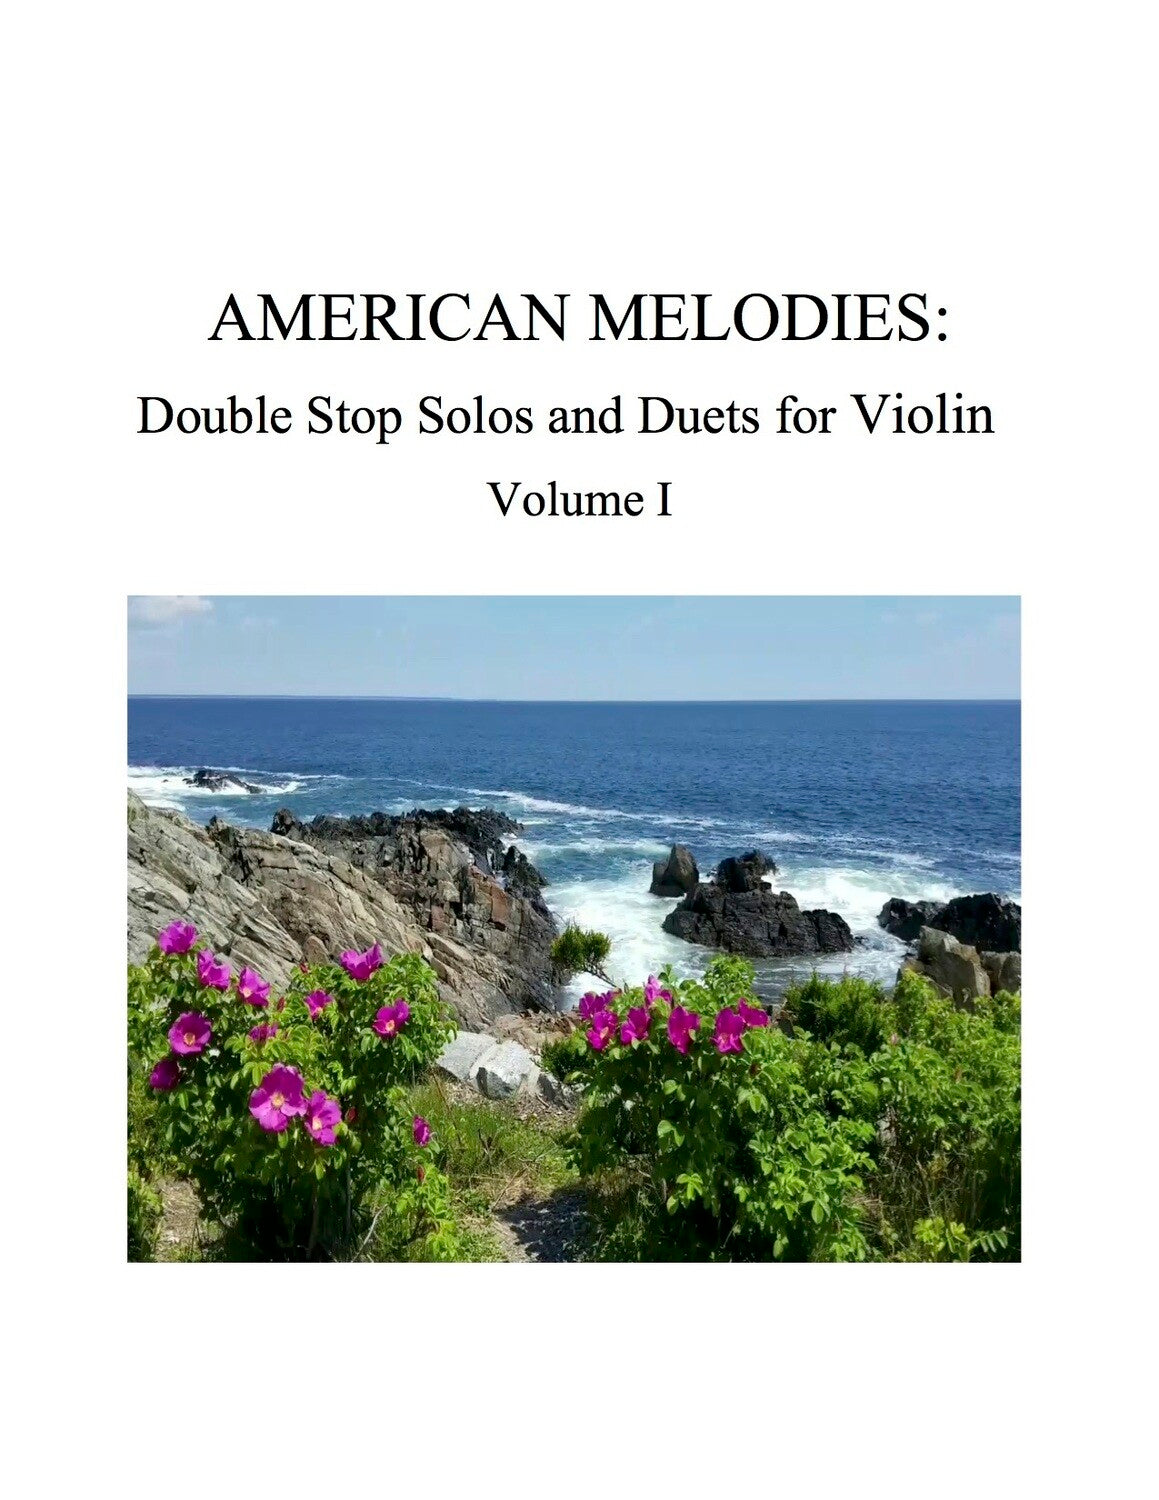 027 - American Melodies for Violin, Double Stop Solos and Duets, Volume I